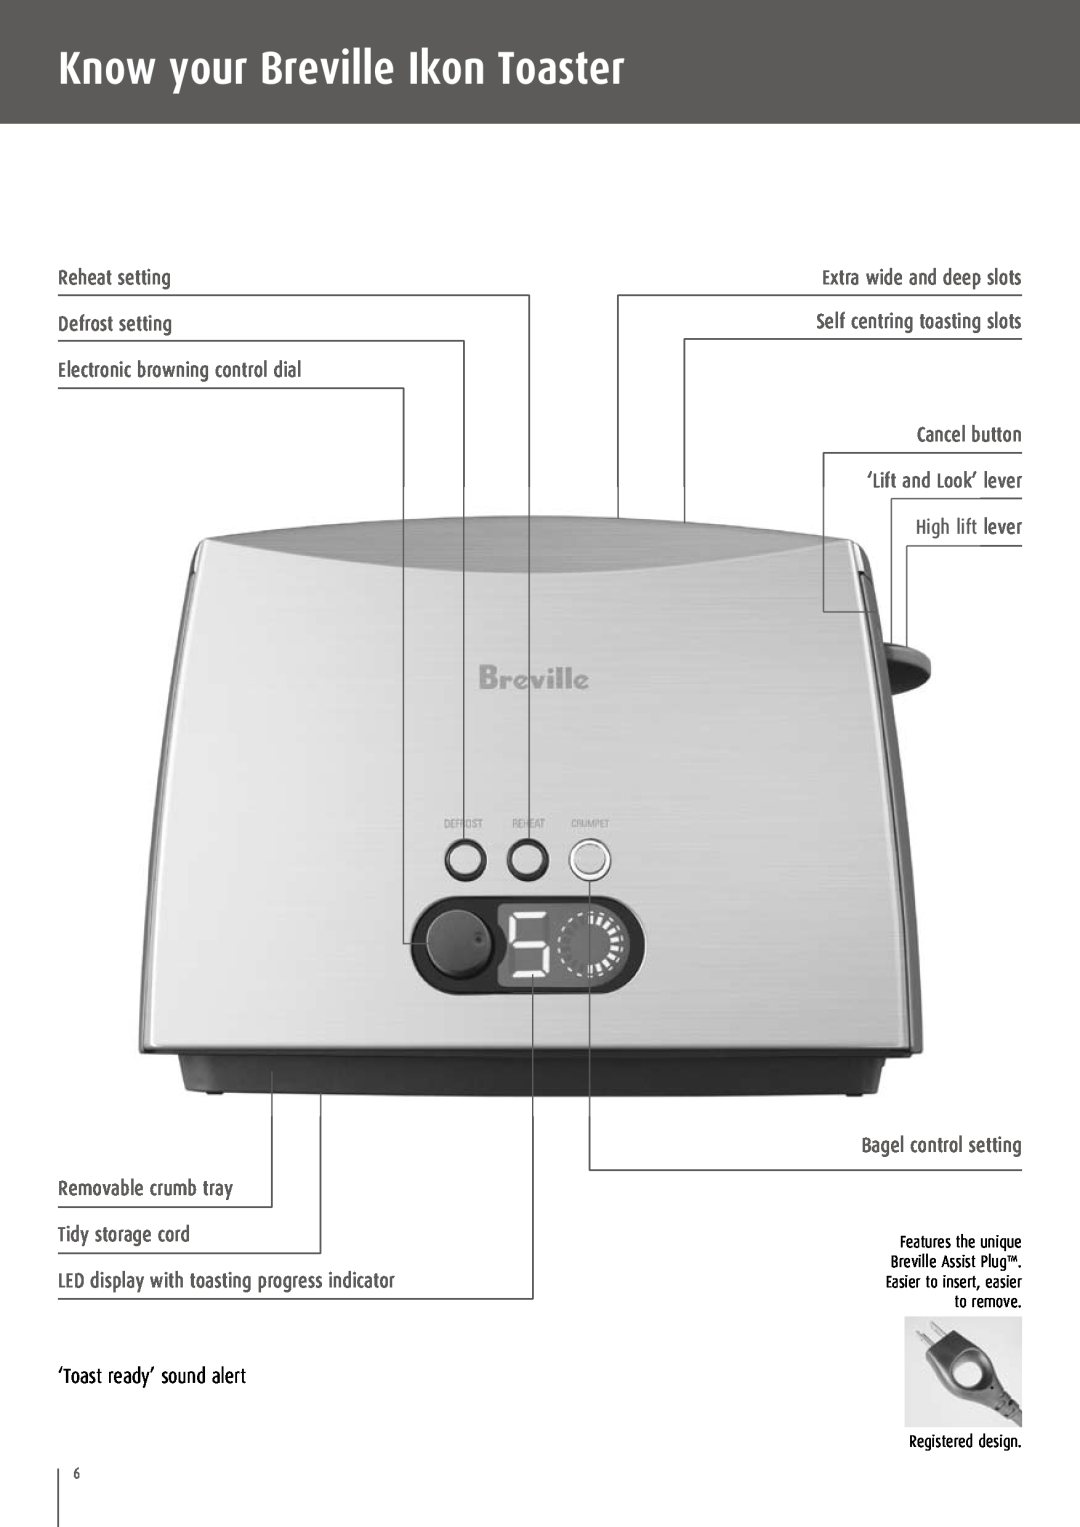 Breville CT70XL/A manual Know your Breville Ikon Toaster, ‘Toast ready’ sound alert 